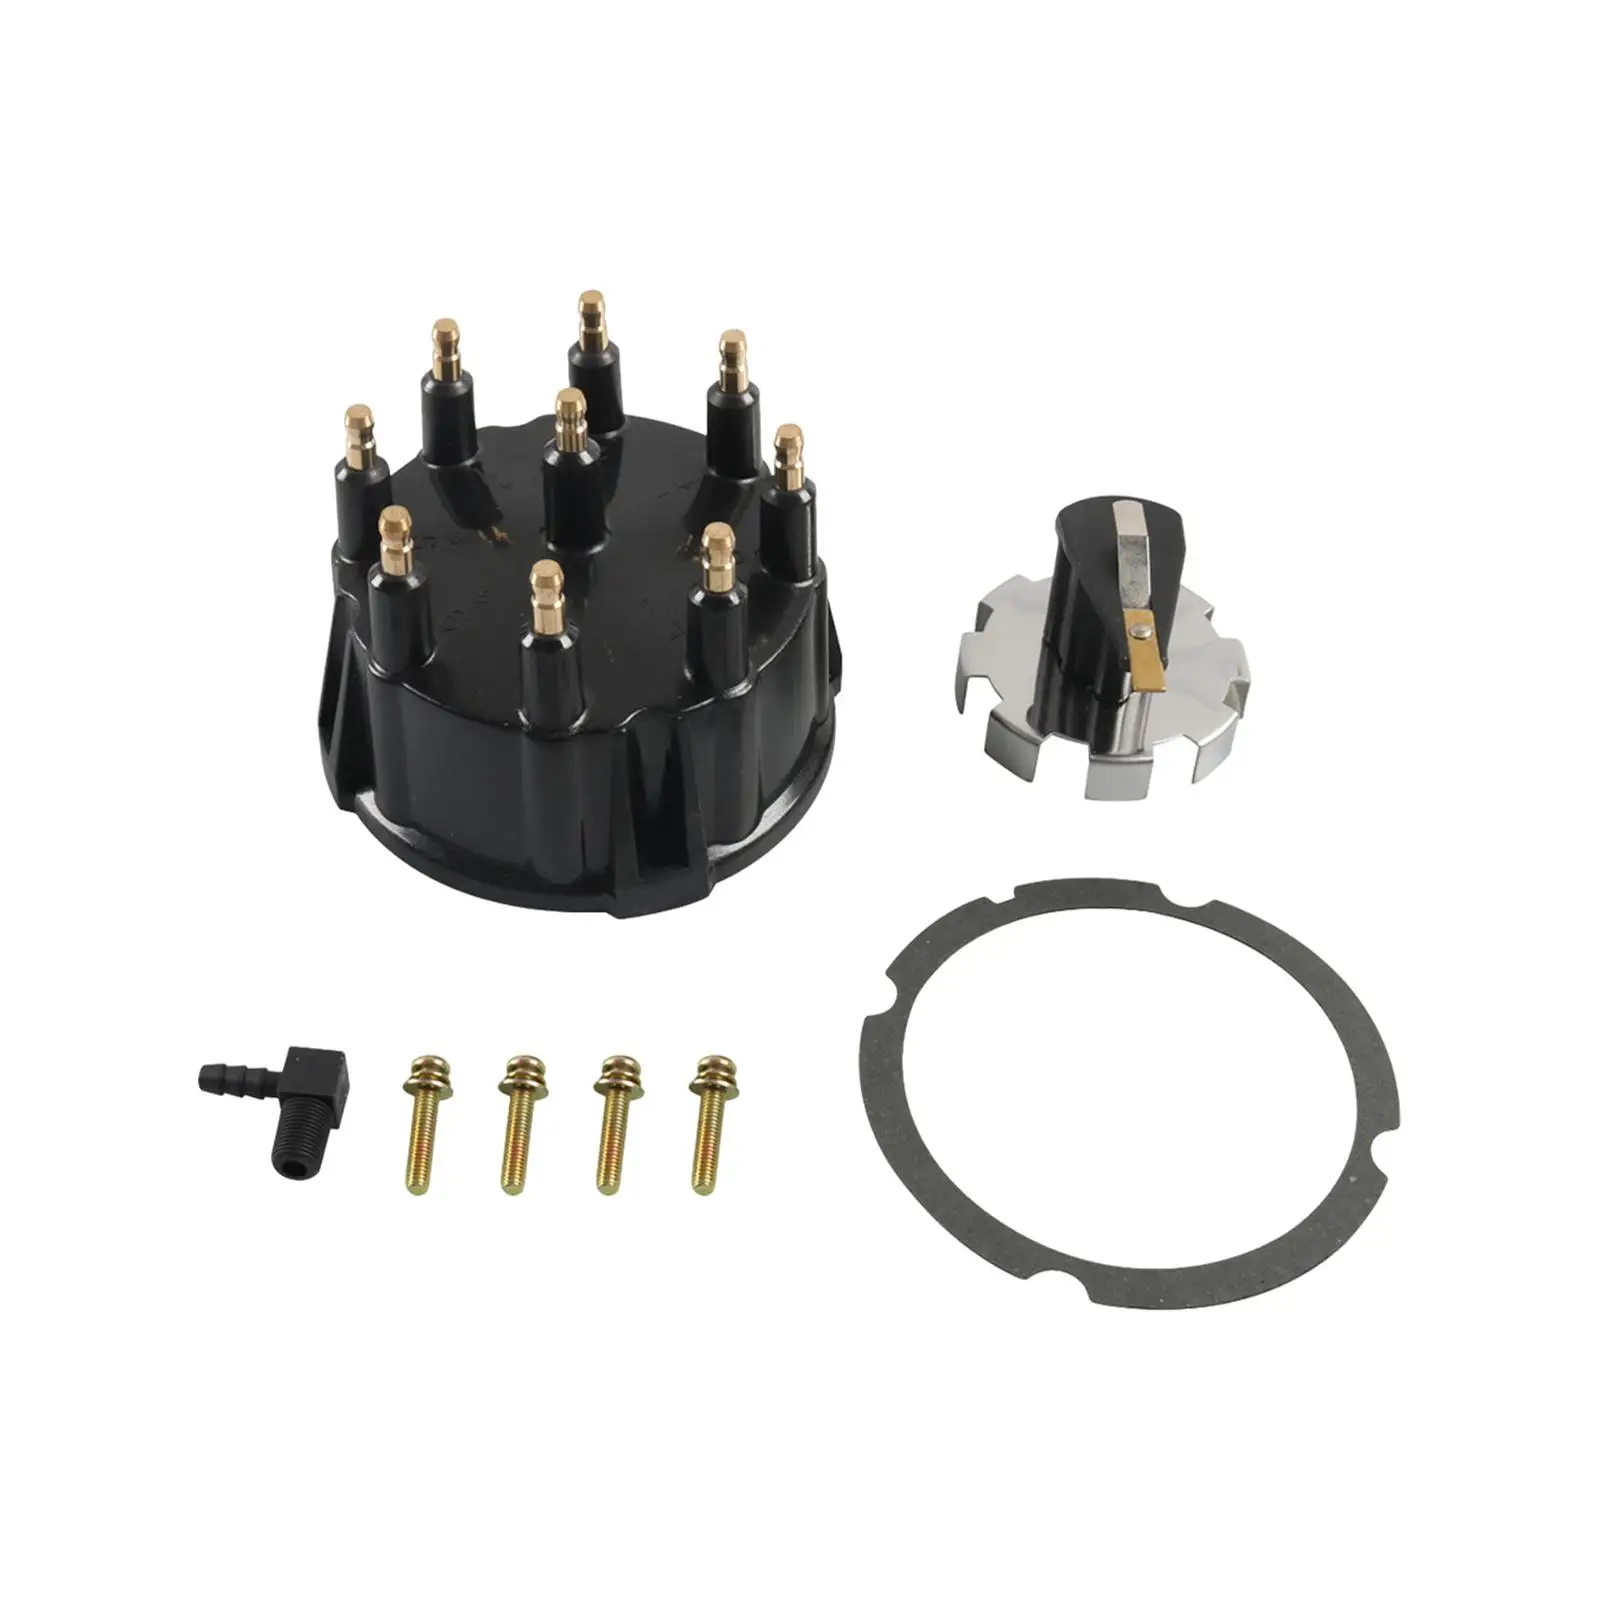 805759Q3 Accessories High Performance Replaces Distributor Cap Tune up Set